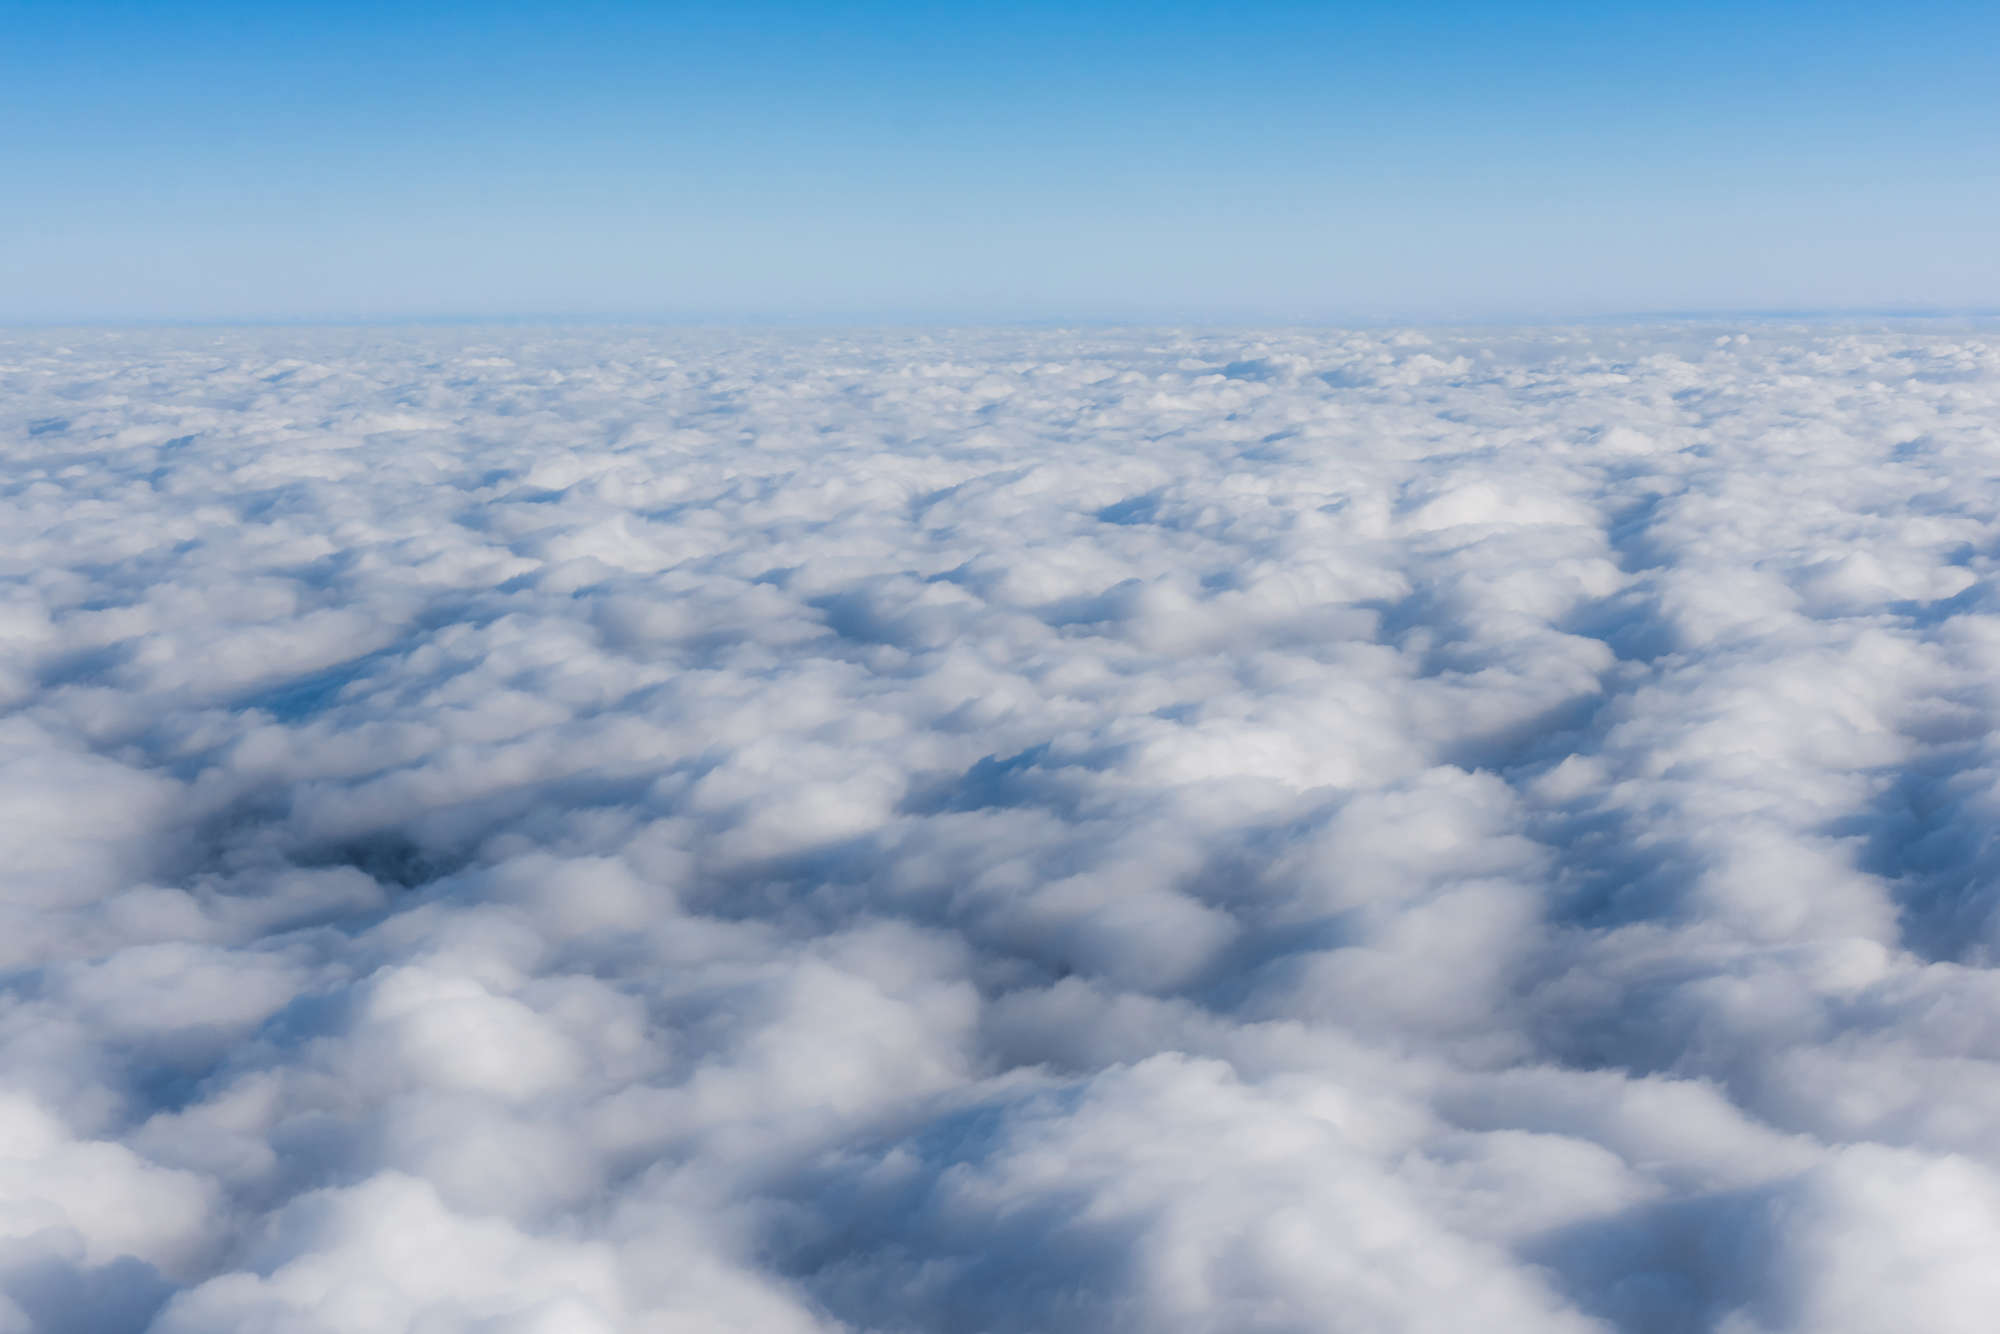             Nature photo wallpaper above the clouds on textured non-woven
        